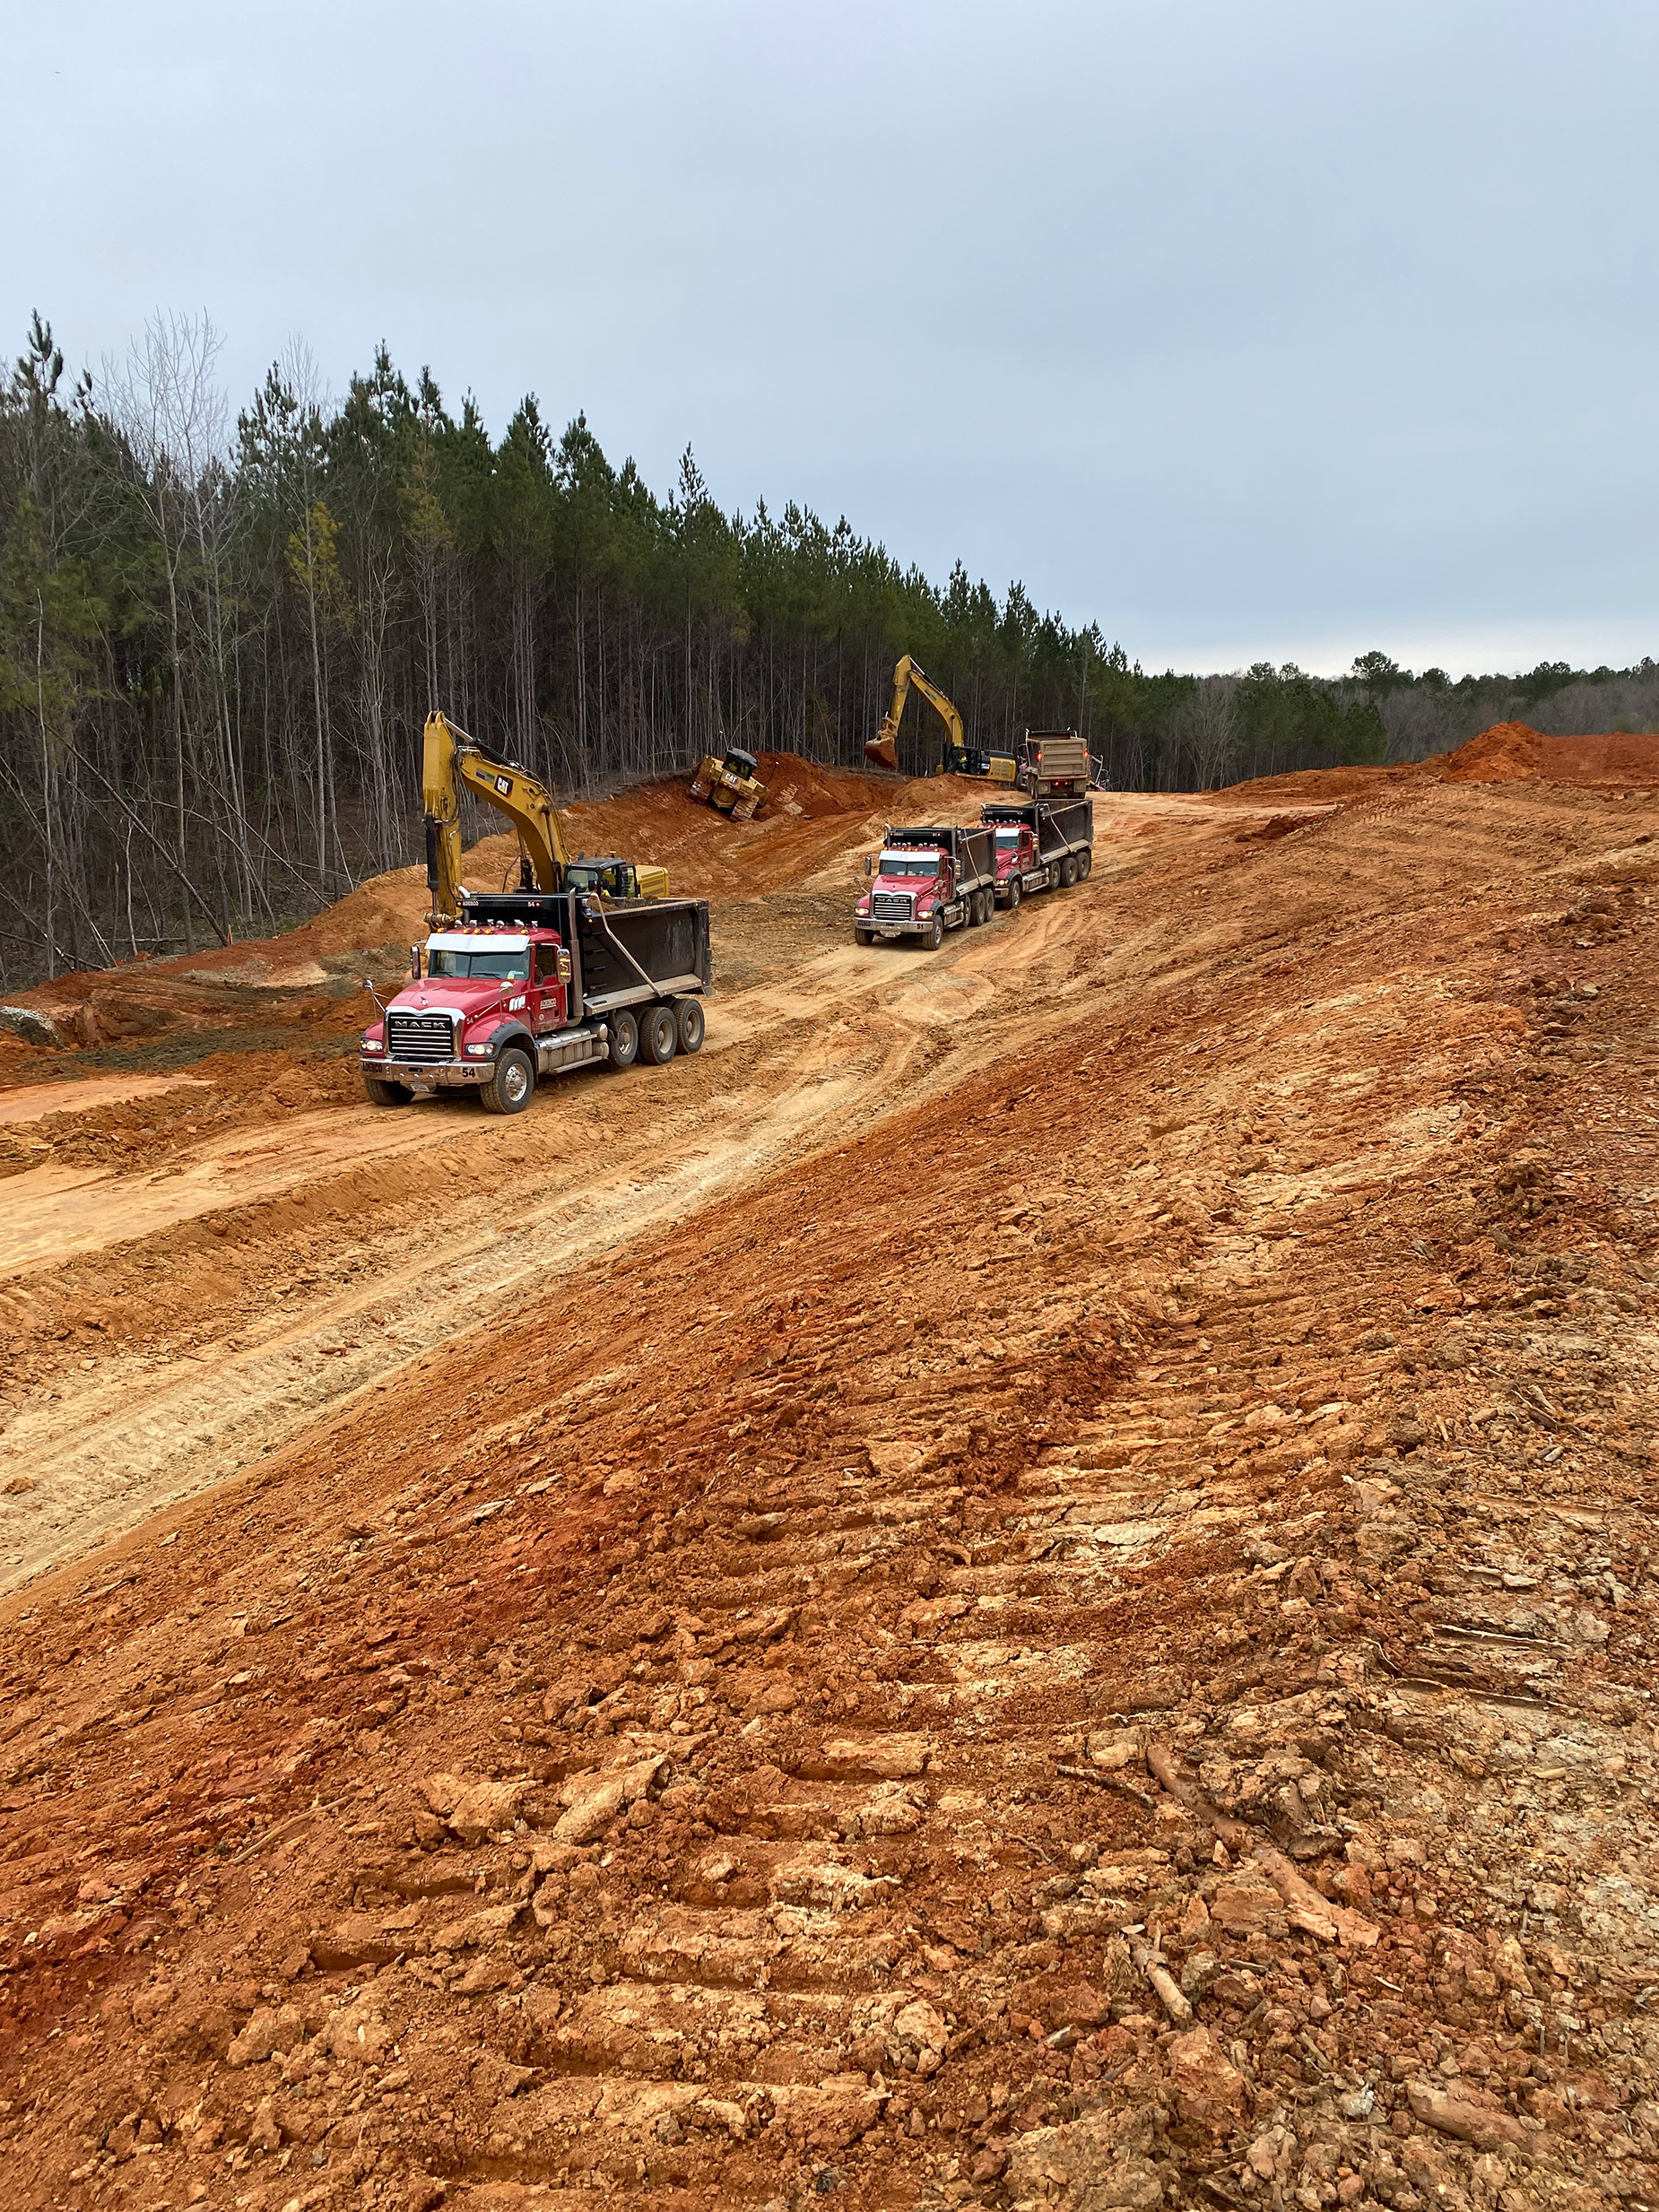 Excavation for the future I-26 Westbound on-ramp at Exit 85/SC-202.  Segment 3 of construction has over 1 million cubic yards of excavation and embankment to complete the widening of I-26 and side road improvements.